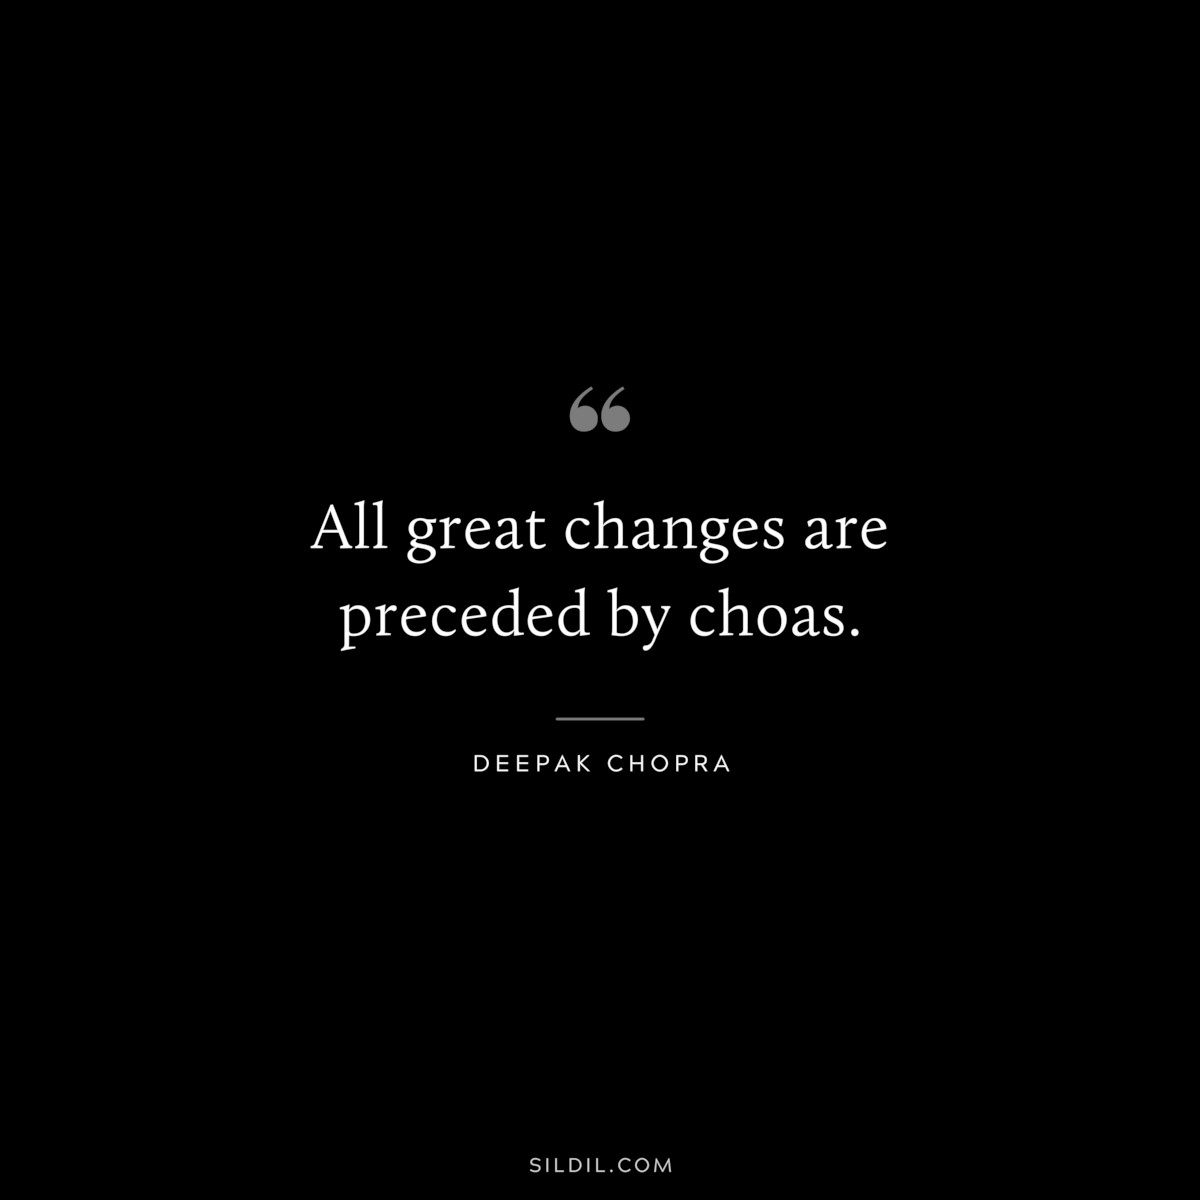 All great changes are preceded by choas. ― Deepak Chopra